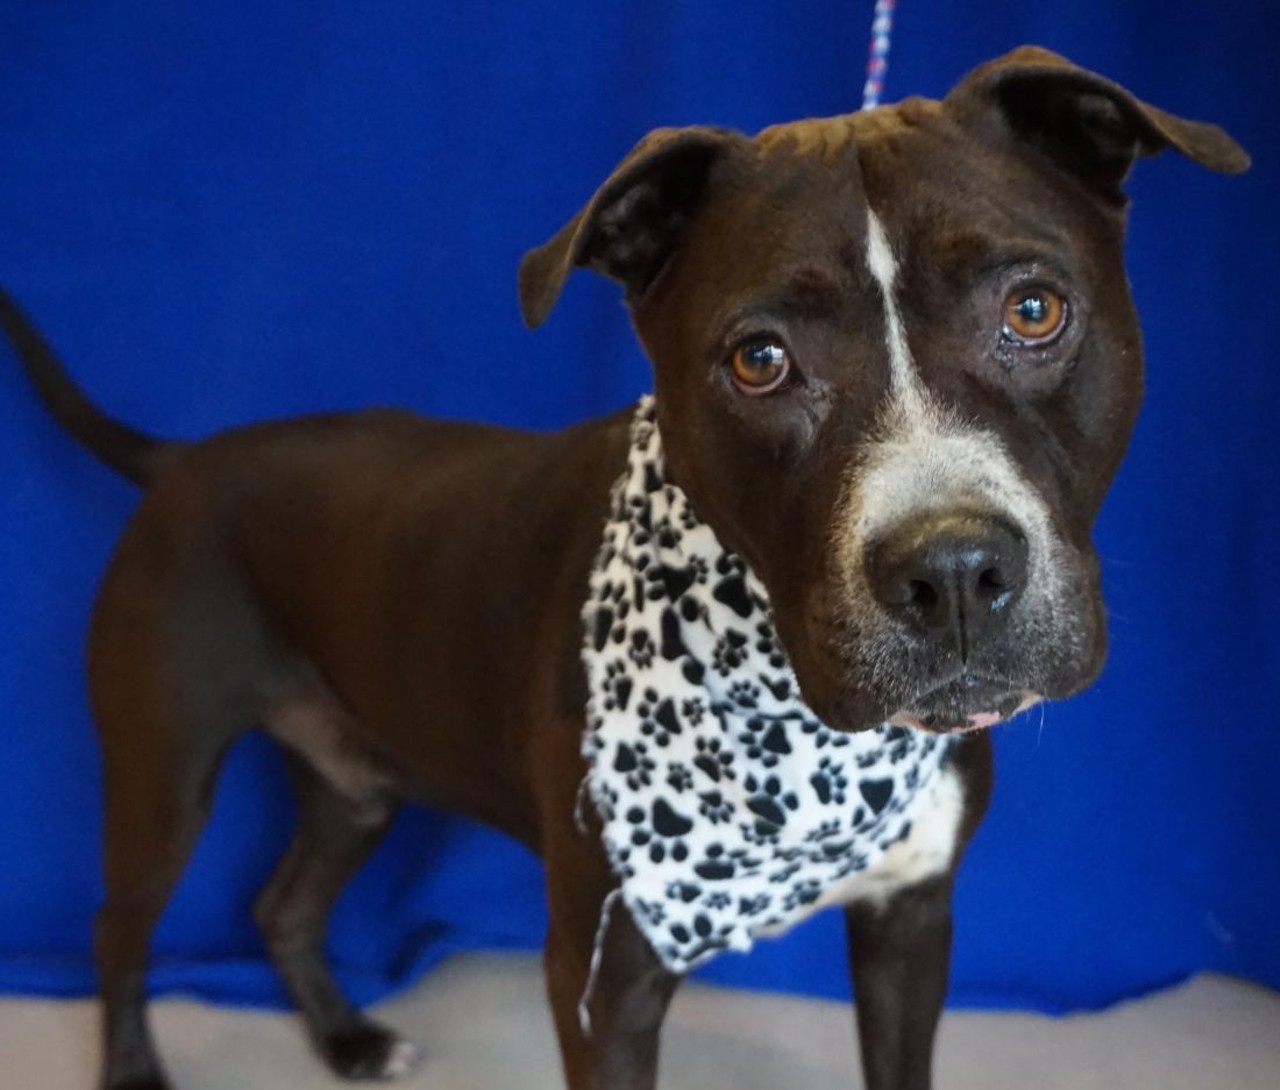 NAME: Scrappy 
GENDER: Male
BREED: Pit Bull
AGE: 7 years, 1 month
WEIGHT: 61 pounds
SPECIAL CONSIDERATIONS: None
REASON I CAME TO MHS: Owner surrender
LOCATION: Rochester Hills Center for Animal Care
ID NUMBER: 870554